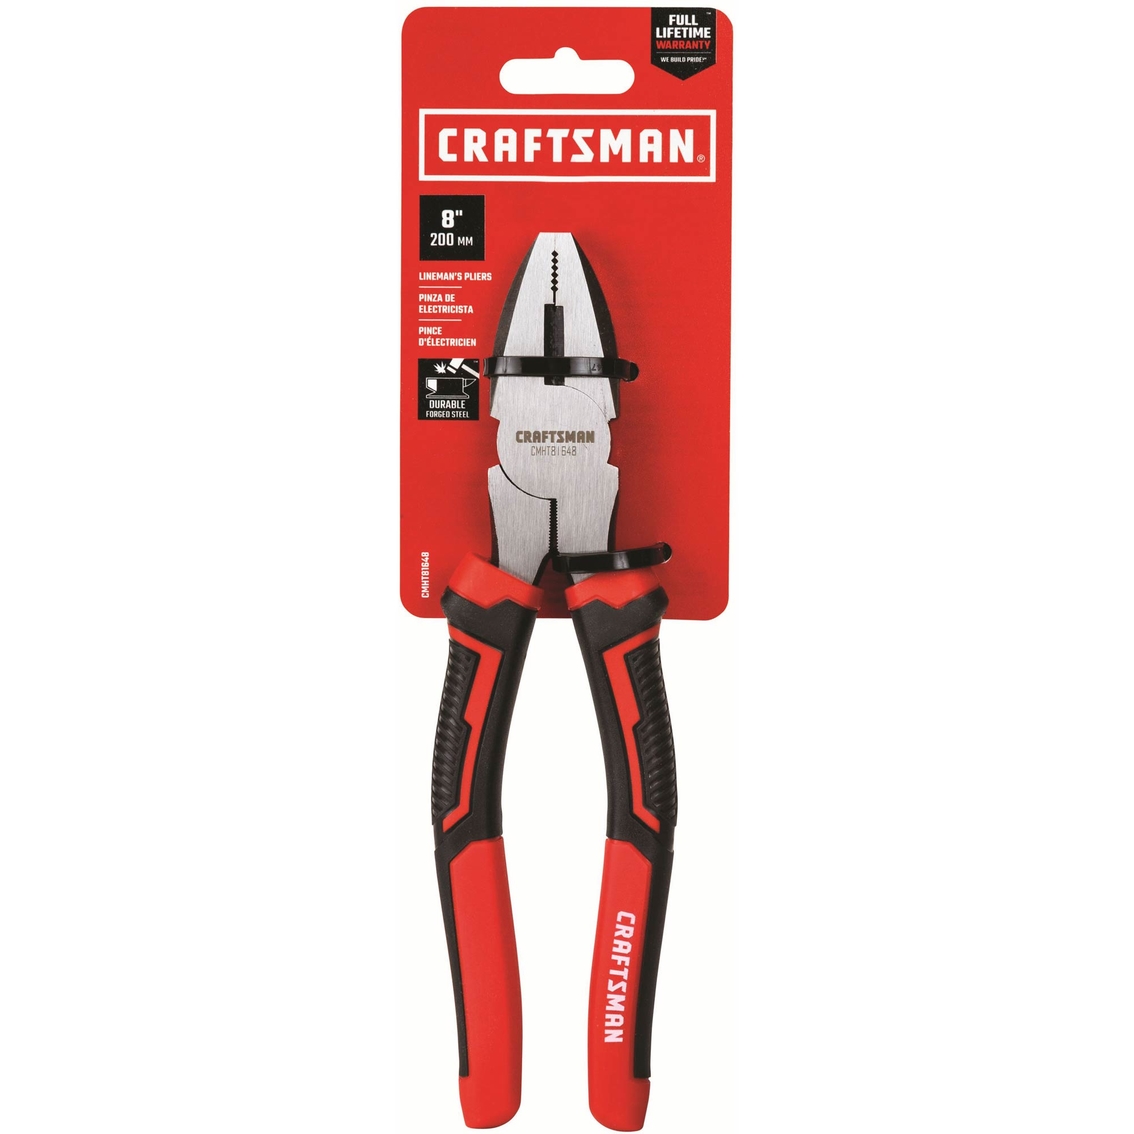 CRAFTSMAN 8-in Cutting Pliers - Image 3 of 3